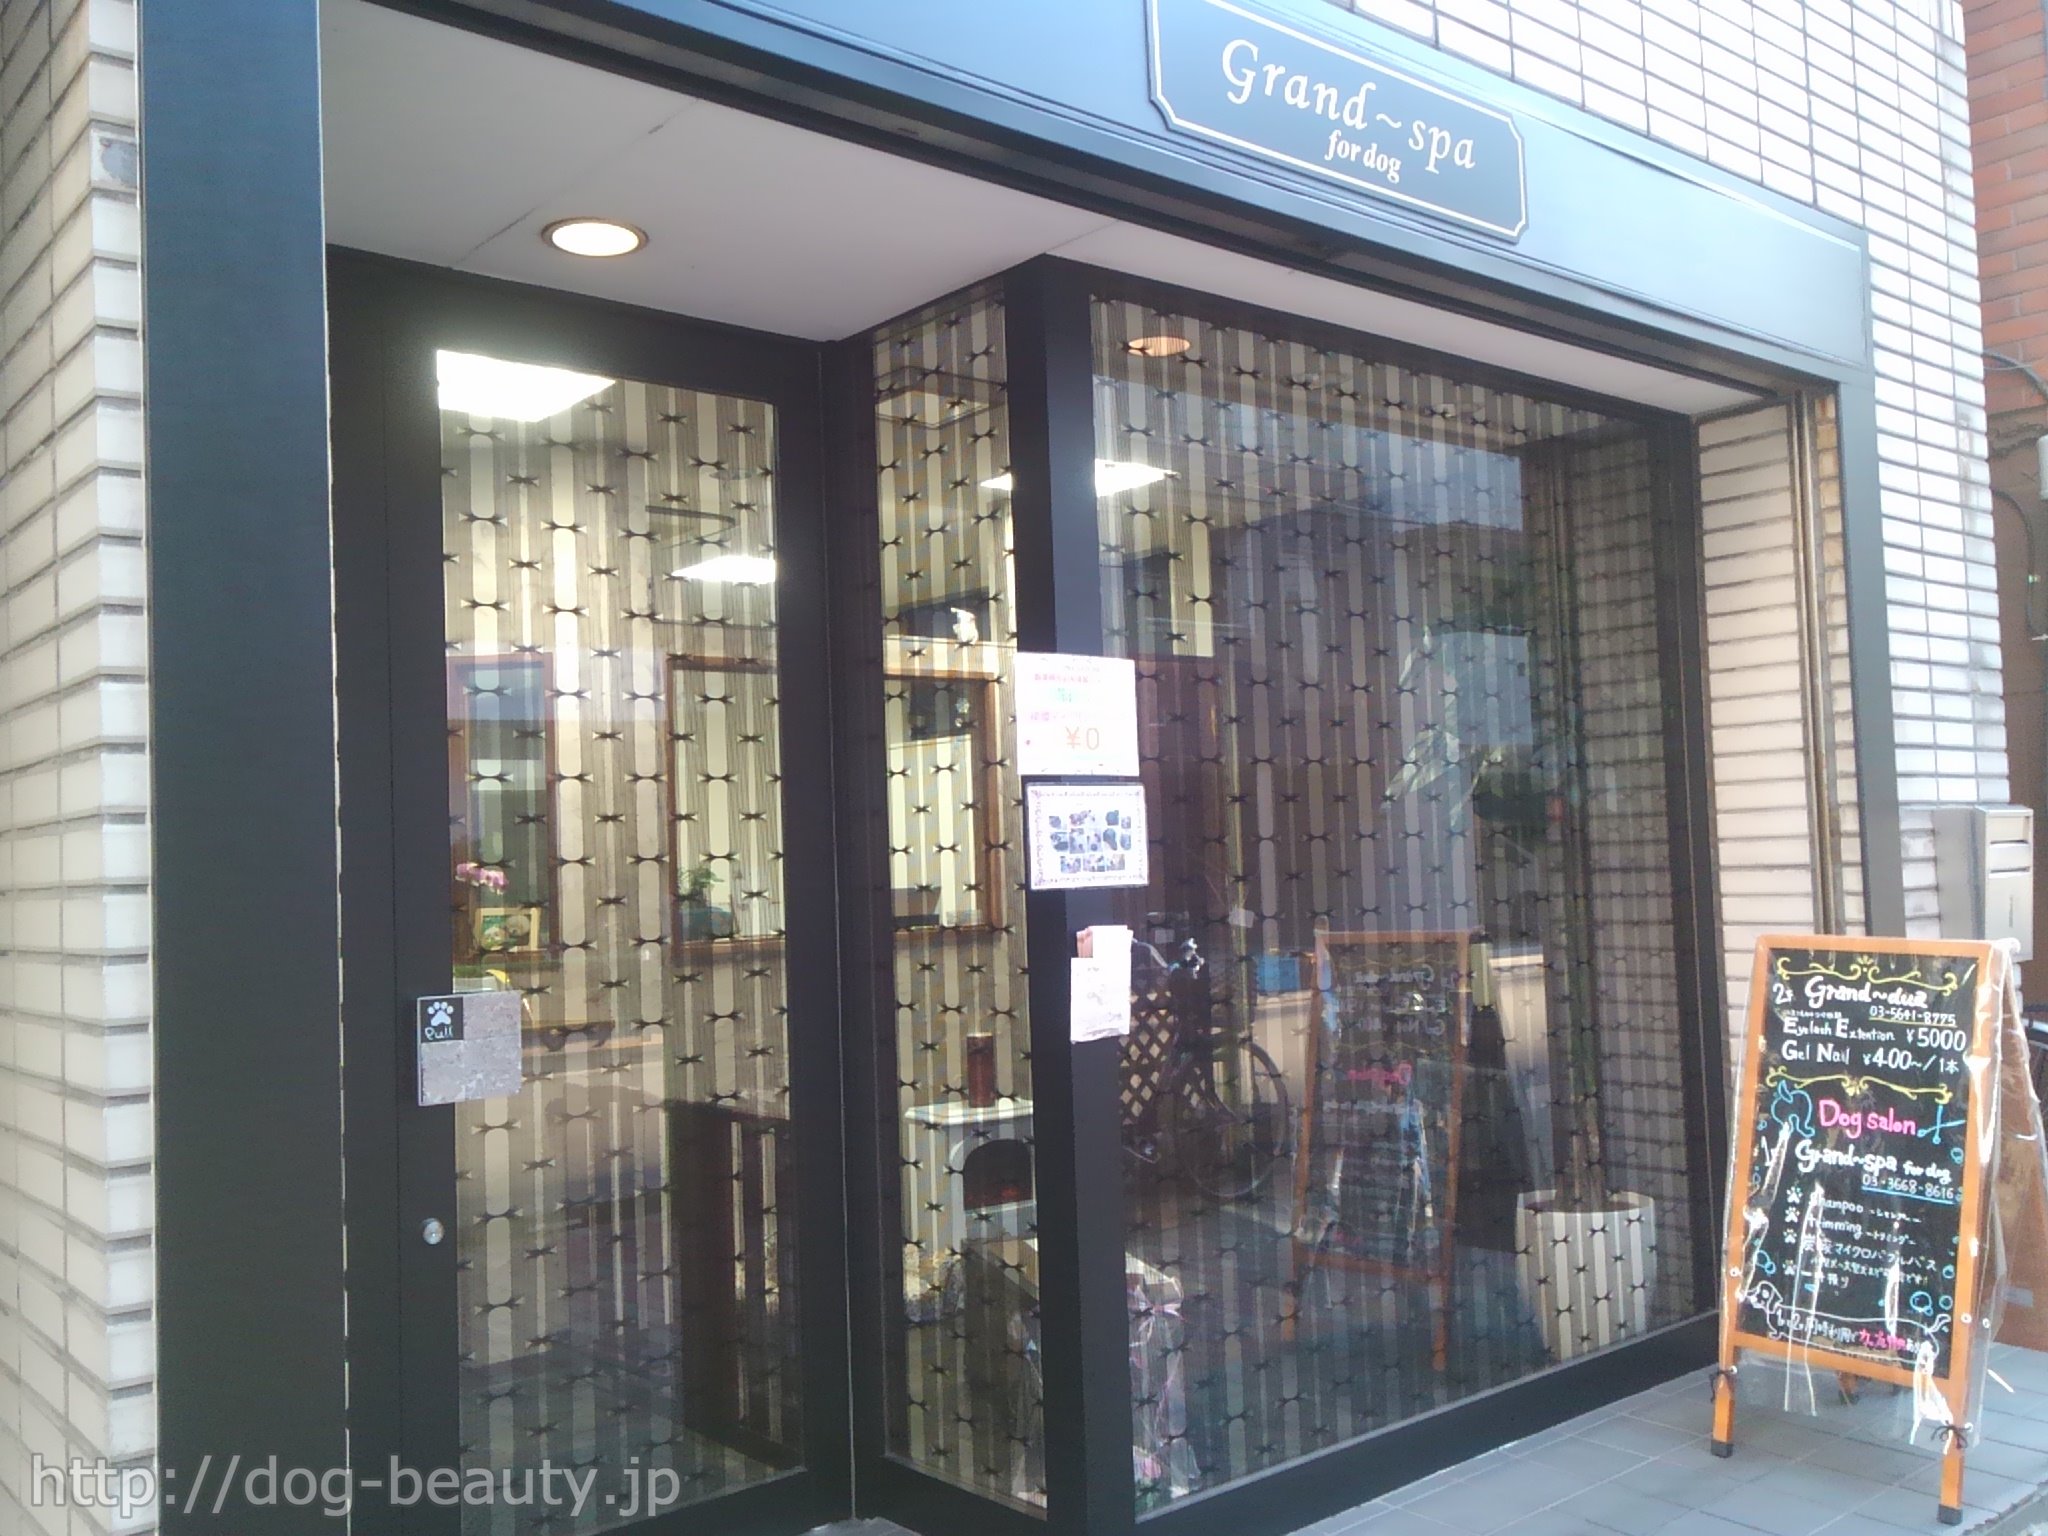 Grand~spa for dog